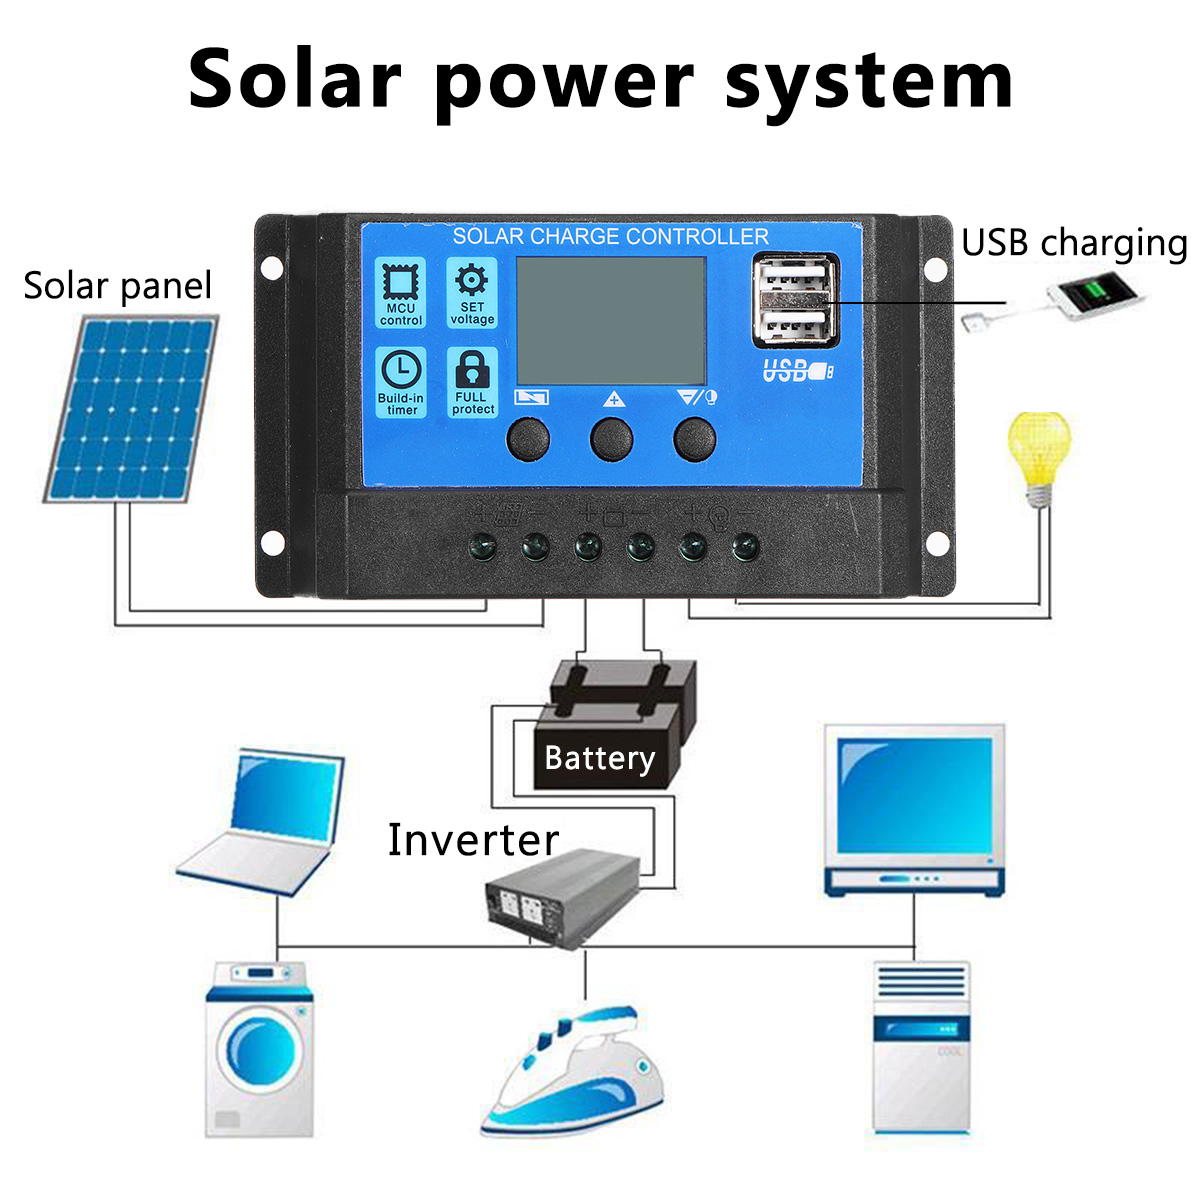 40W-Portable-Solar-Panel-Kit-Battery-Charger-Controller-Waterproof-For-Camping-Traveling-1830191-2